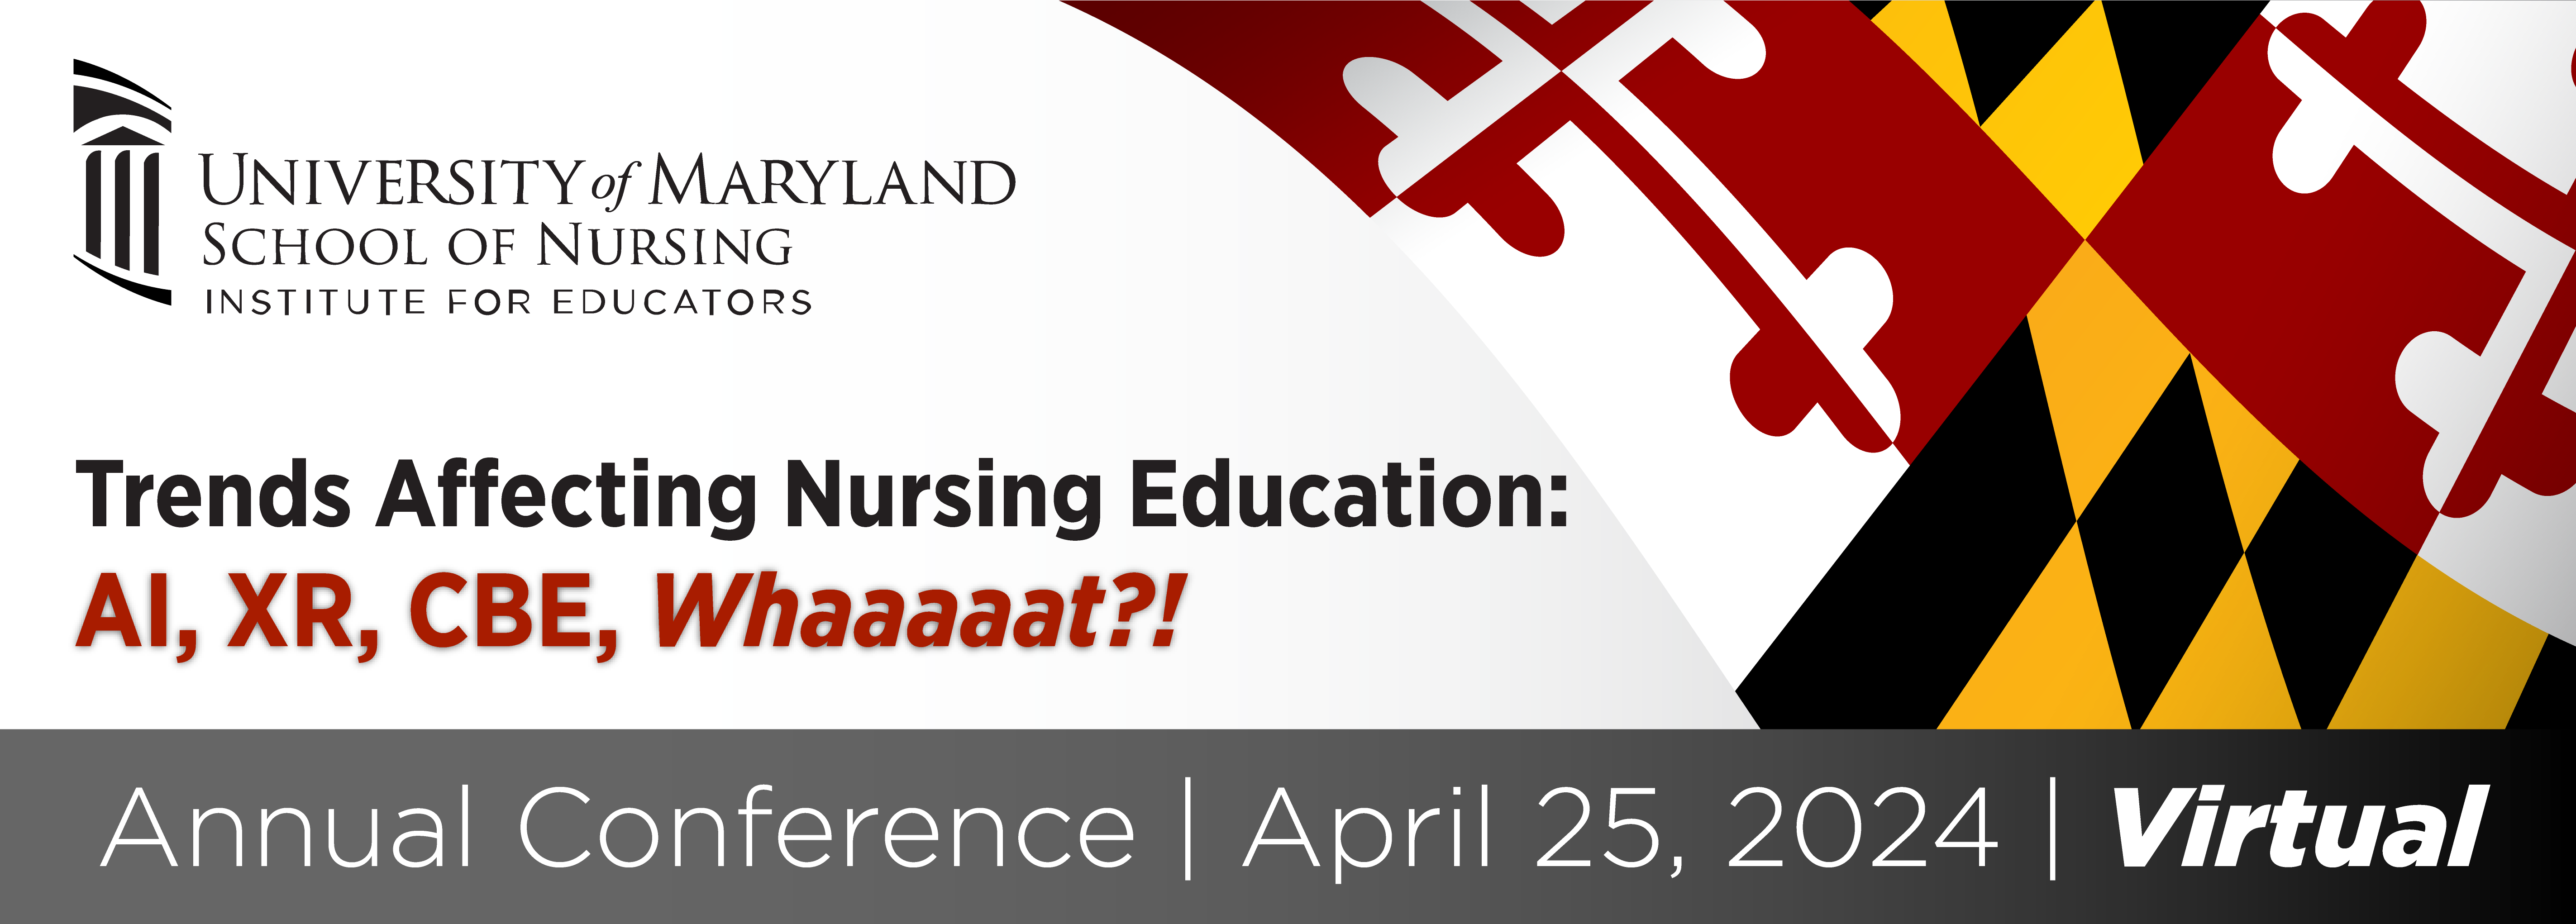 Institute for Educators Spring Conference 2024 Last Call for Abstracts